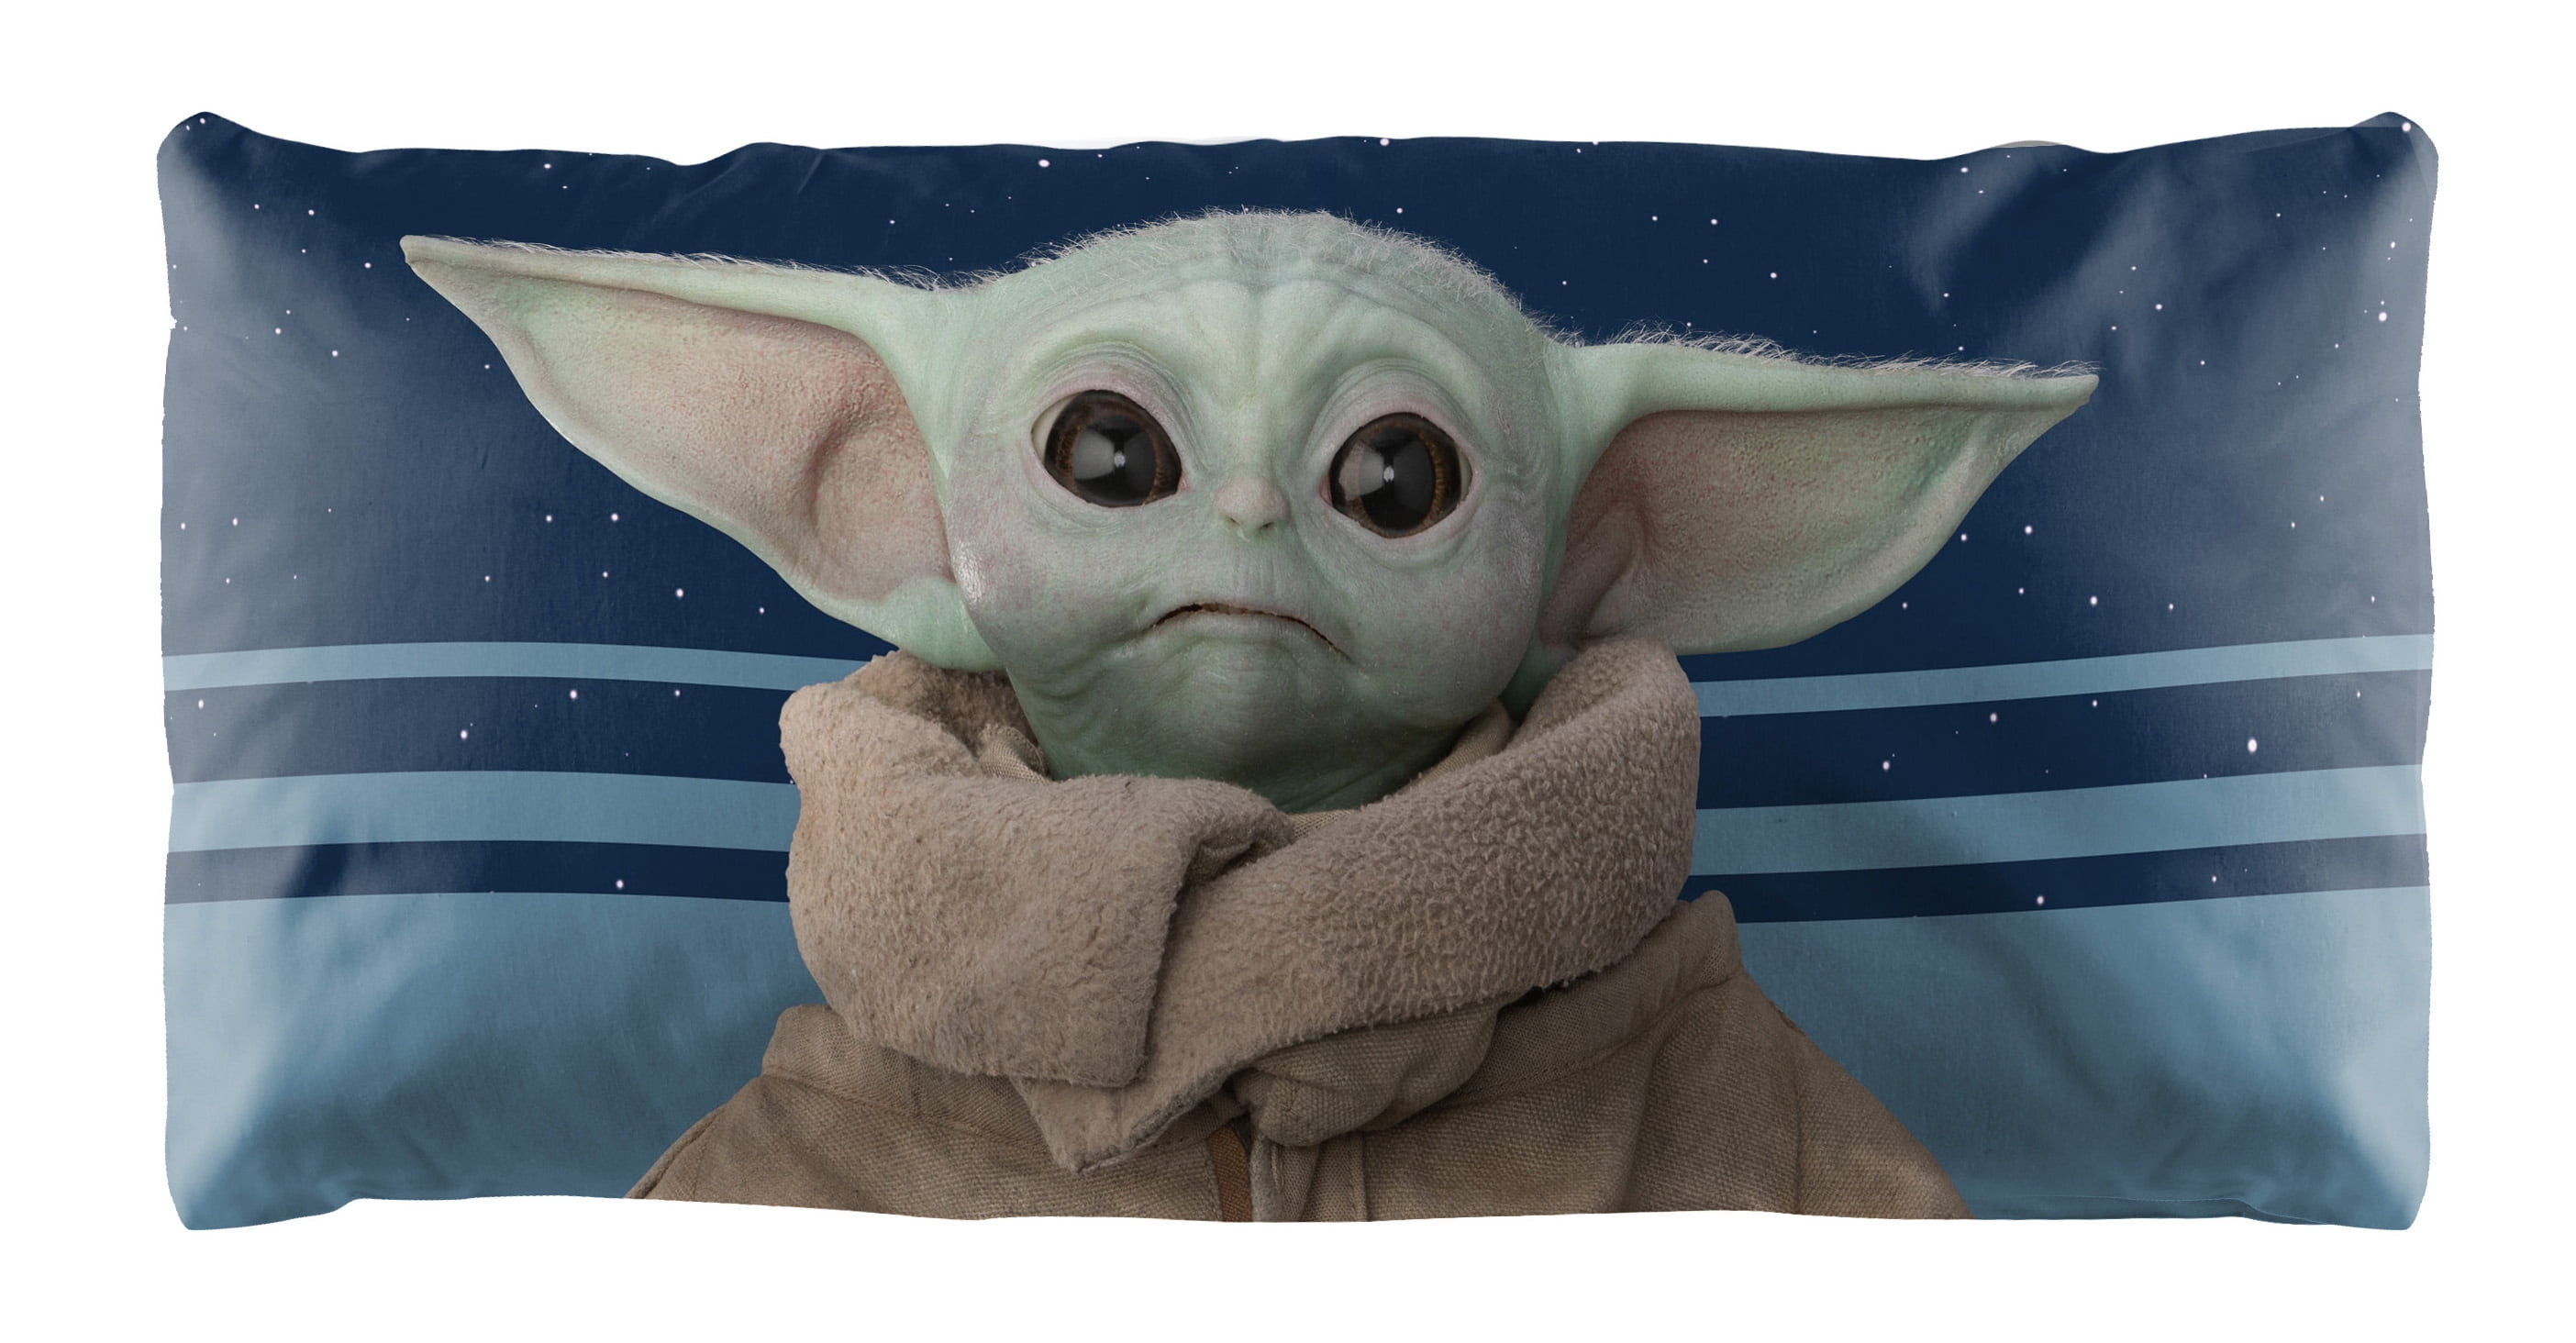 Baby Yoda The Child Extra Large Reversible Body Pillow, 48 x 20, Microfiber, Blue, Star Wars